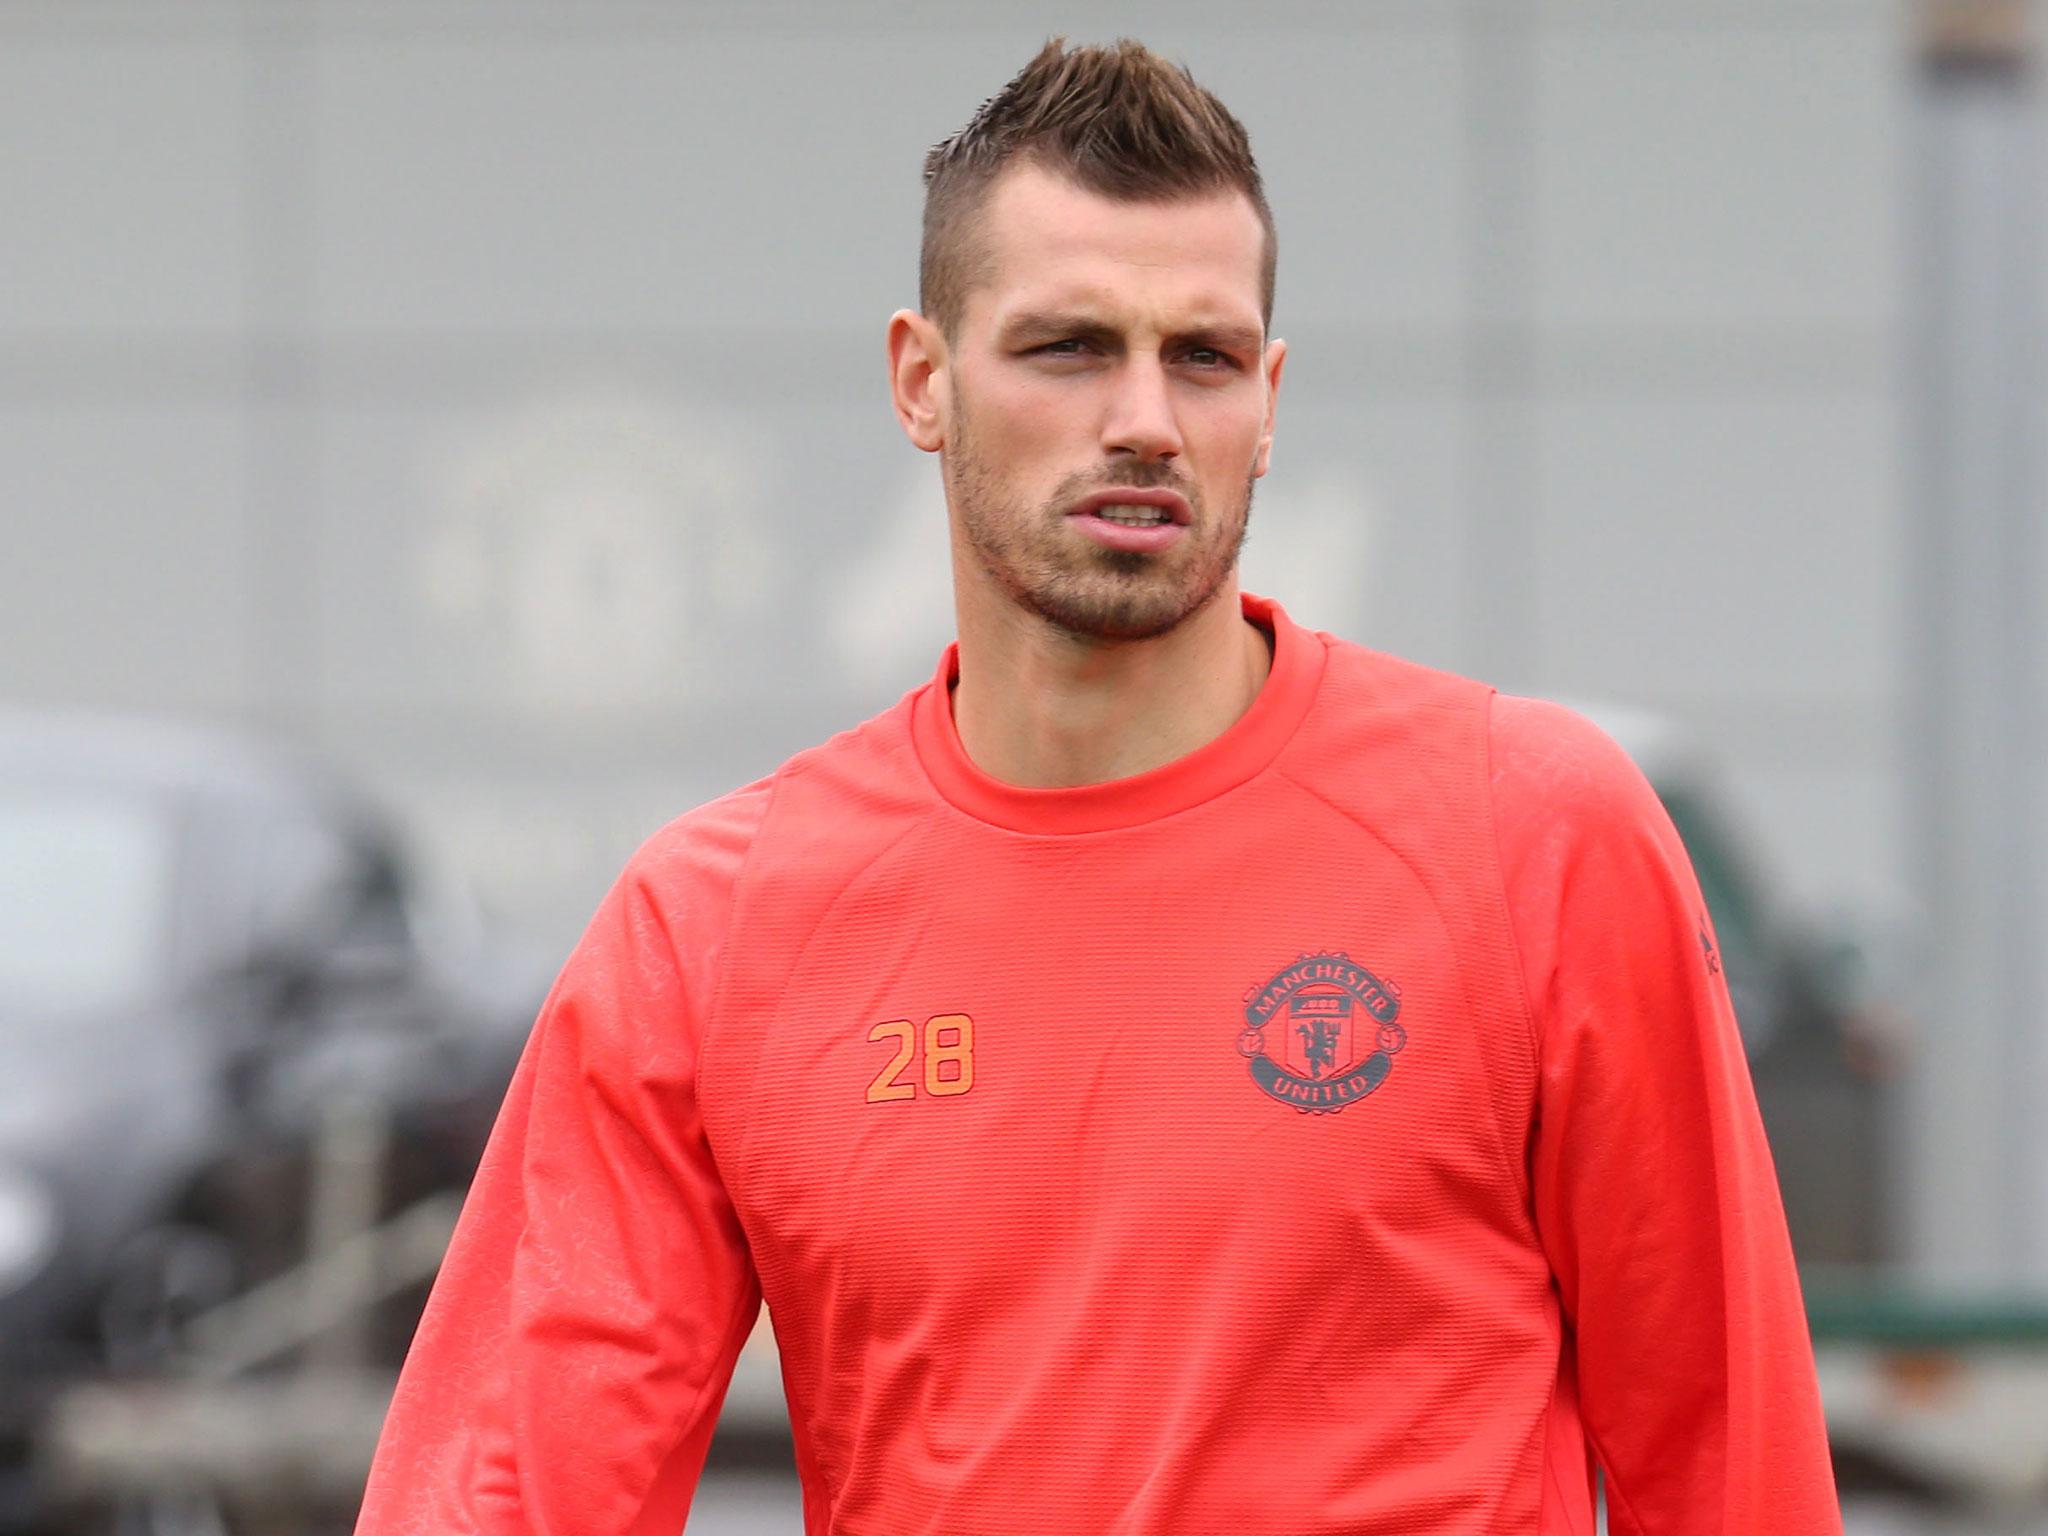 Morgan Schneiderlin has been given approval to leave Manchester United after West Brom made an offer